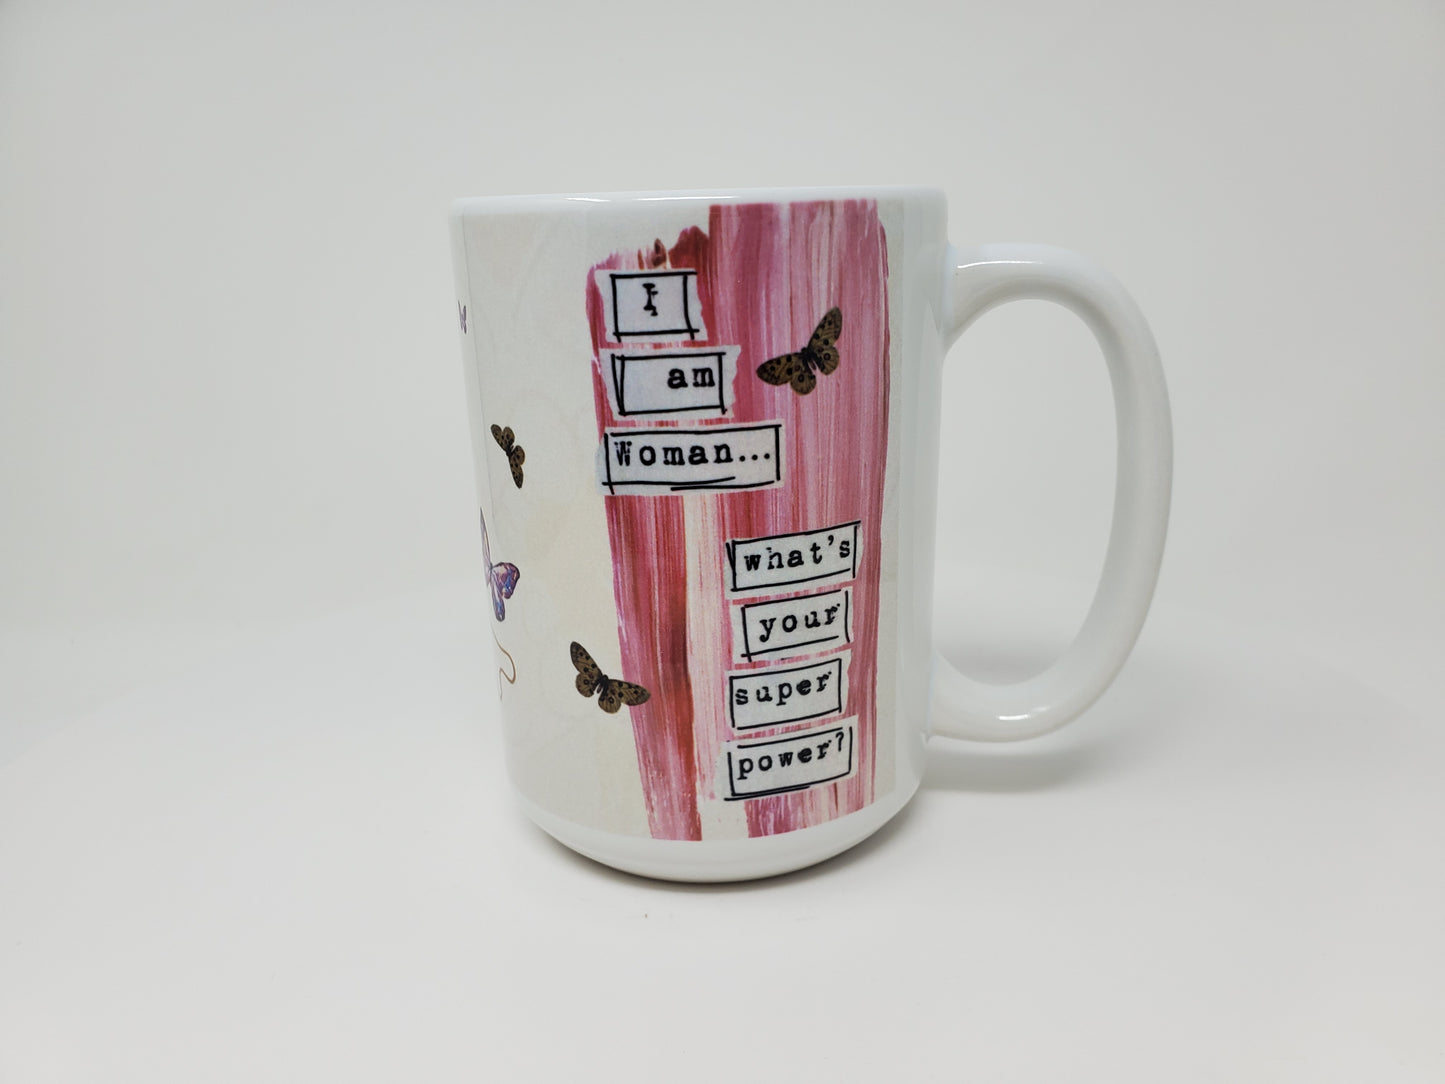 a girl like me… I am woman… what’s your superpower? Mug